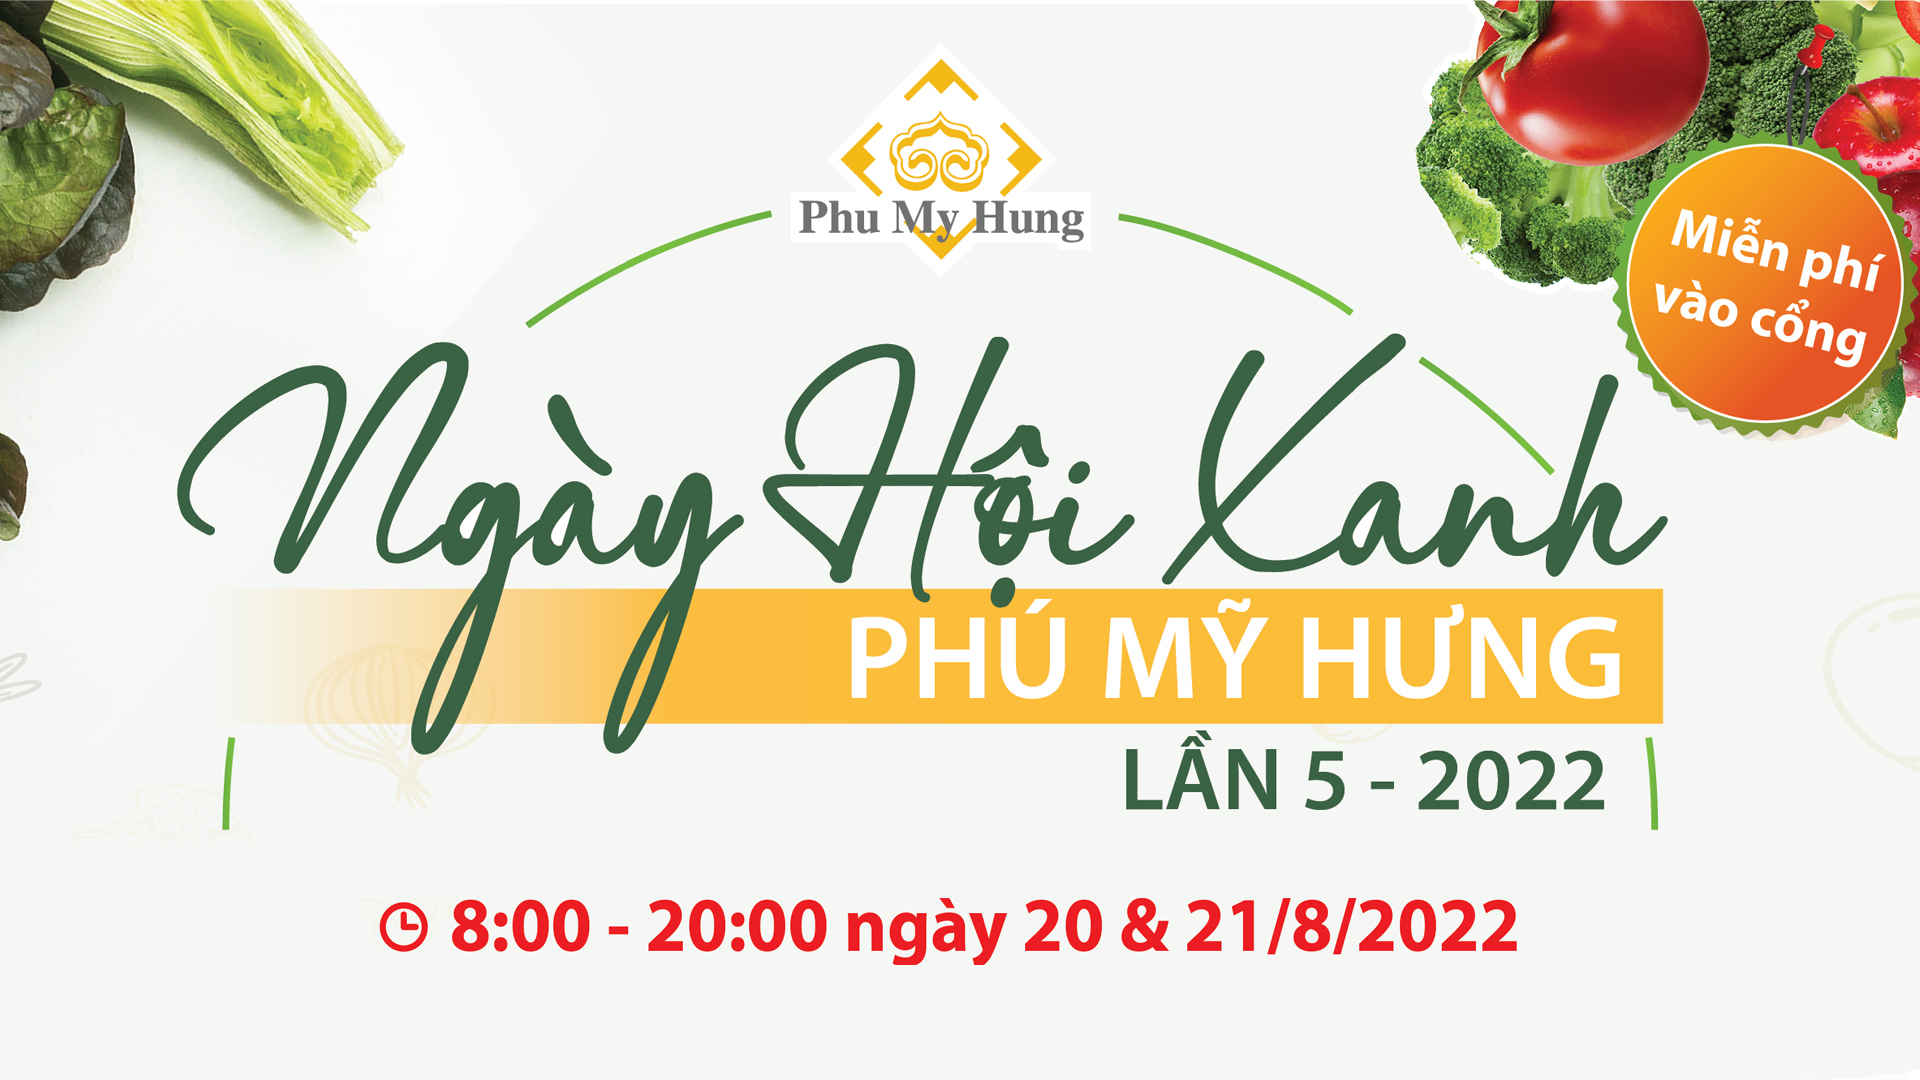 Looking forward to The 5th Phu My Hung Green Day 2022